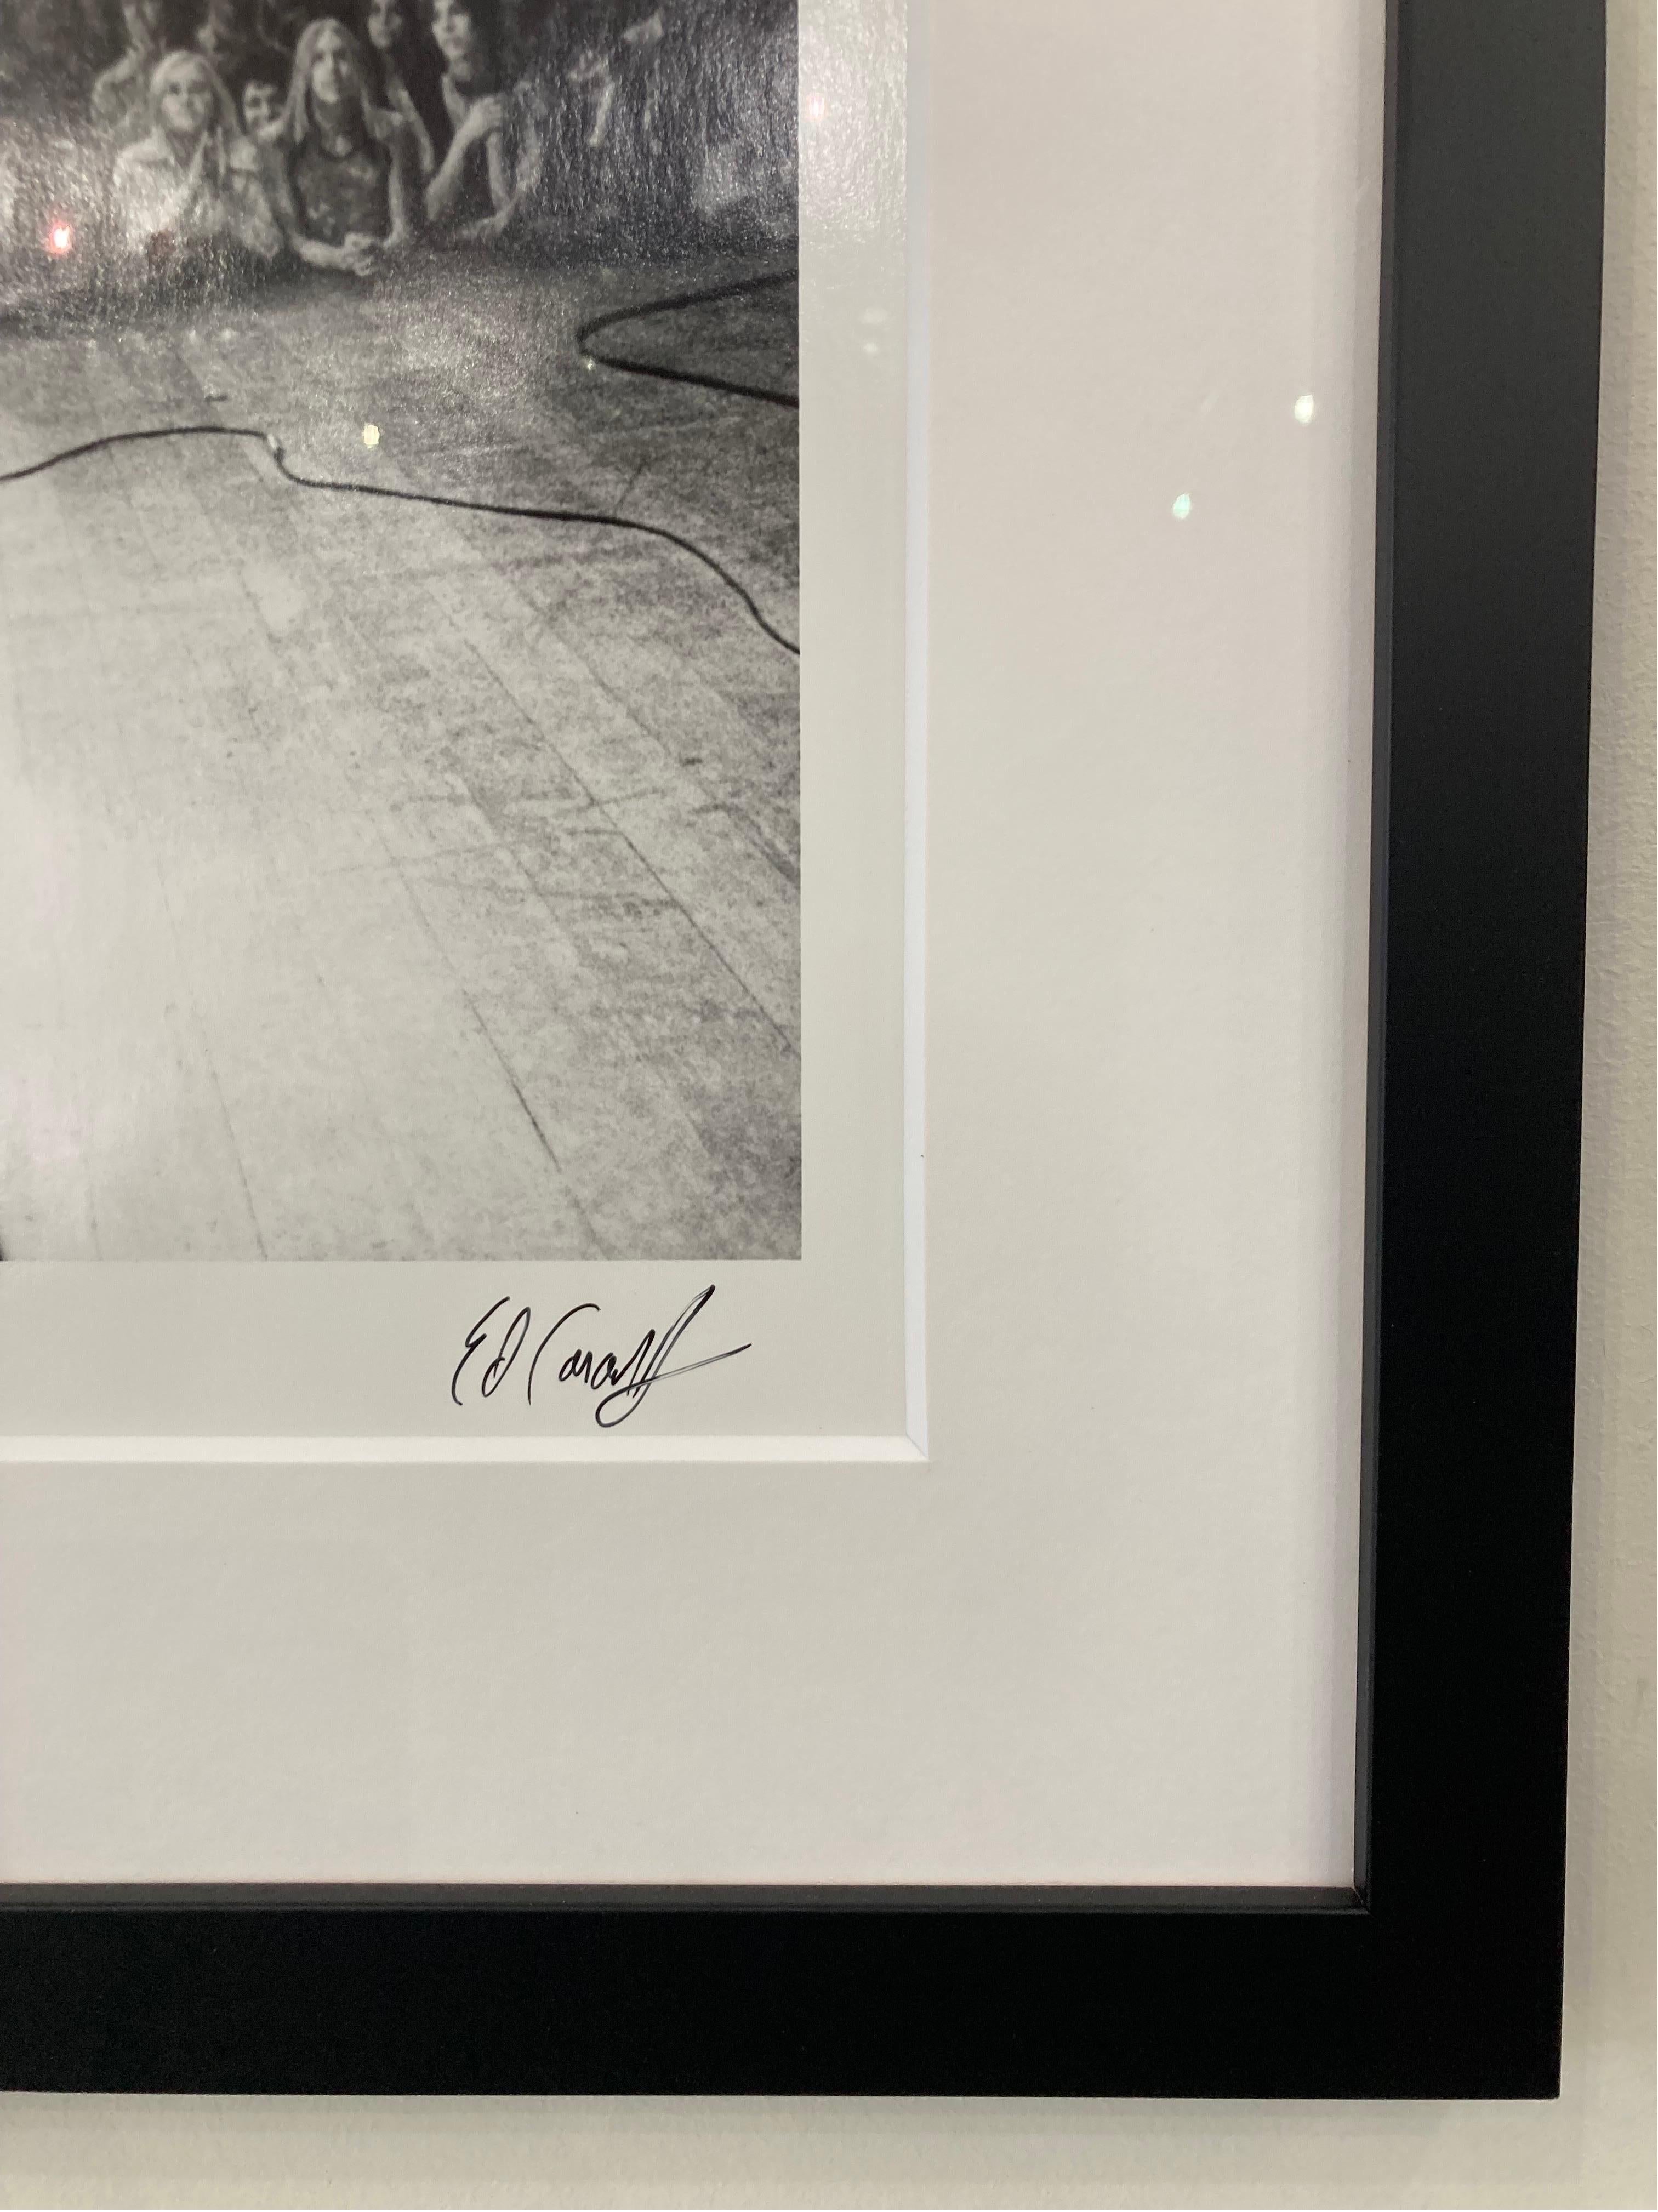 Elton John Takes Flight - Special co-signed limited edition print, framed - Photorealist Photograph by Ed Caraeff